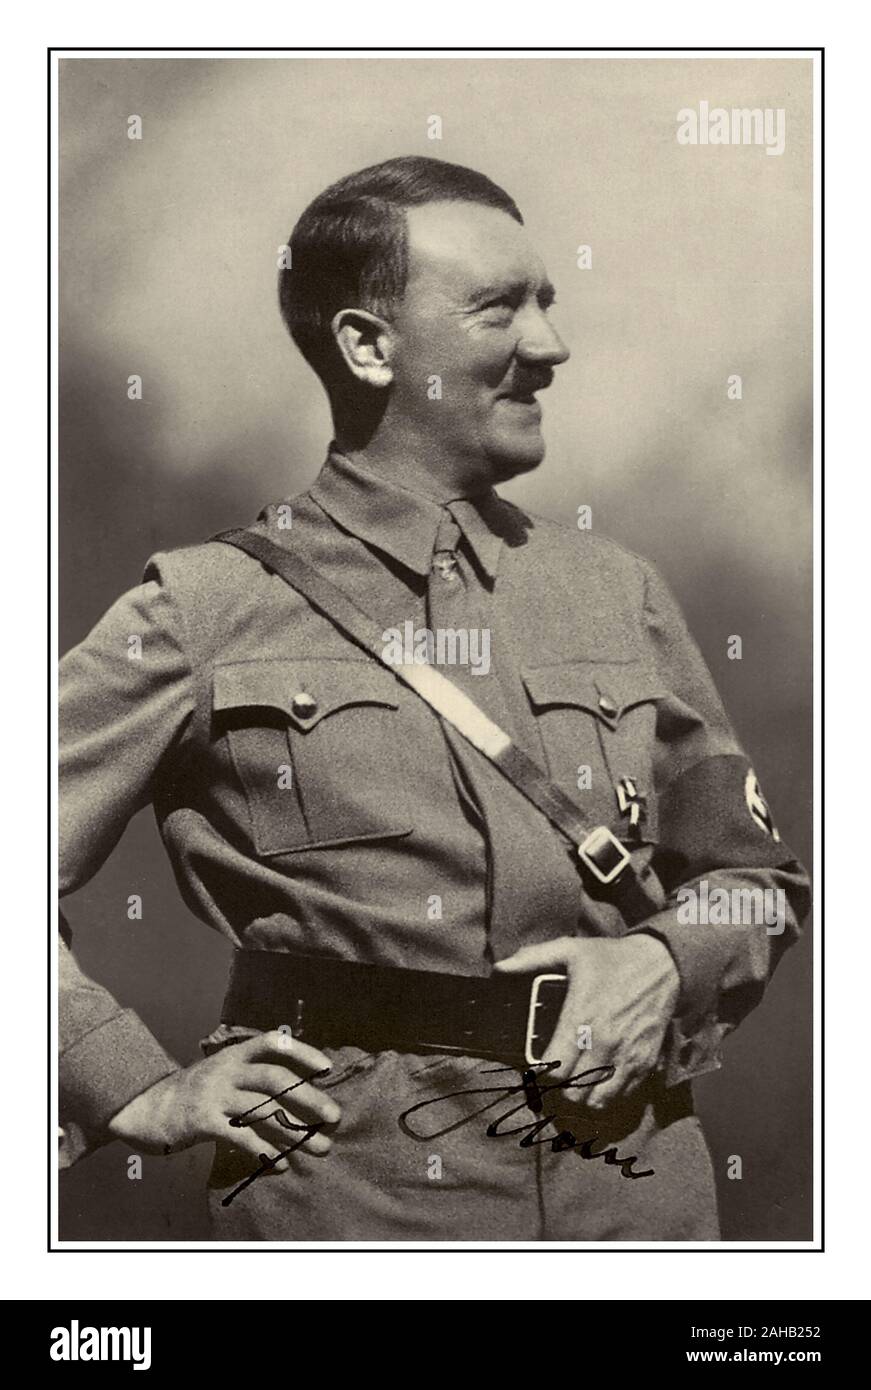 ADOLF HITLER (1889-1945) Fuhrer of the Third Reich Germany 1934-1945. signed promotional propaganda postcard photograph. Adolf Hitler in Nazi military uniform wearing a swastika armband. Signed by Adolf Hitler Stock Photo